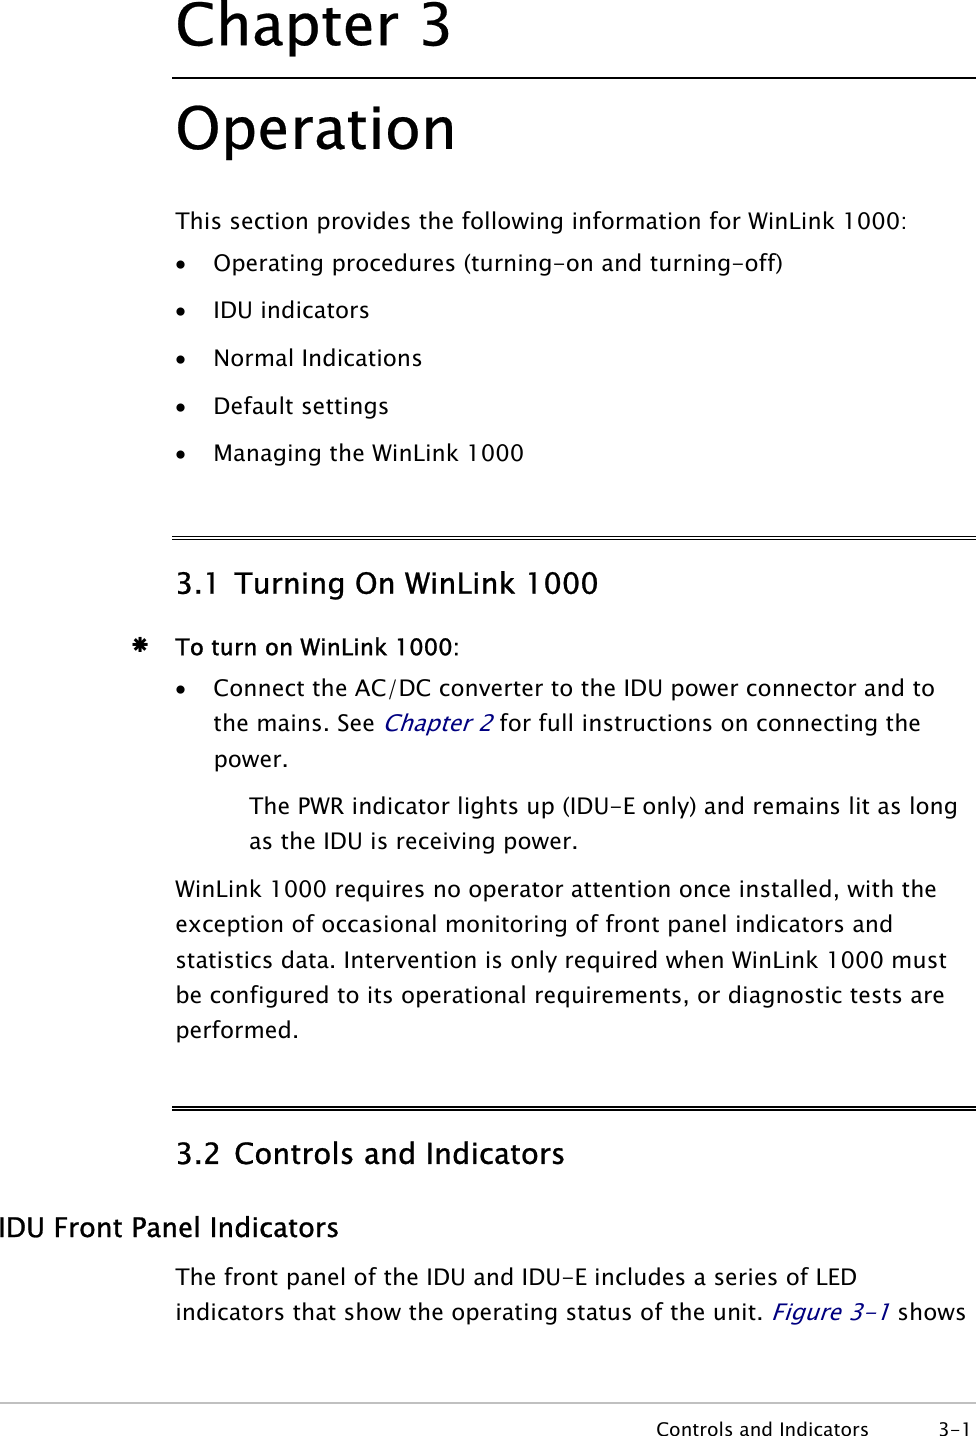 Chapter  3 Operation This section provides the following information for WinLink 1000: • Operating procedures (turning-on and turning-off) • IDU indicators • Normal Indications • Default settings • Managing the WinLink 1000 3.1 Turning On WinLink 1000 Æ To turn on WinLink 1000: • Connect the AC/DC converter to the IDU power connector and to the mains. See Chapter 2 for full instructions on connecting the power. The PWR indicator lights up (IDU-E only) and remains lit as long as the IDU is receiving power. WinLink 1000 requires no operator attention once installed, with the exception of occasional monitoring of front panel indicators and statistics data. Intervention is only required when WinLink 1000 must be configured to its operational requirements, or diagnostic tests are performed. 3.2 Controls and Indicators IDU Front Panel Indicators The front panel of the IDU and IDU-E includes a series of LED indicators that show the operating status of the unit. Figure  3-1 shows  Controls and Indicators  3-1 